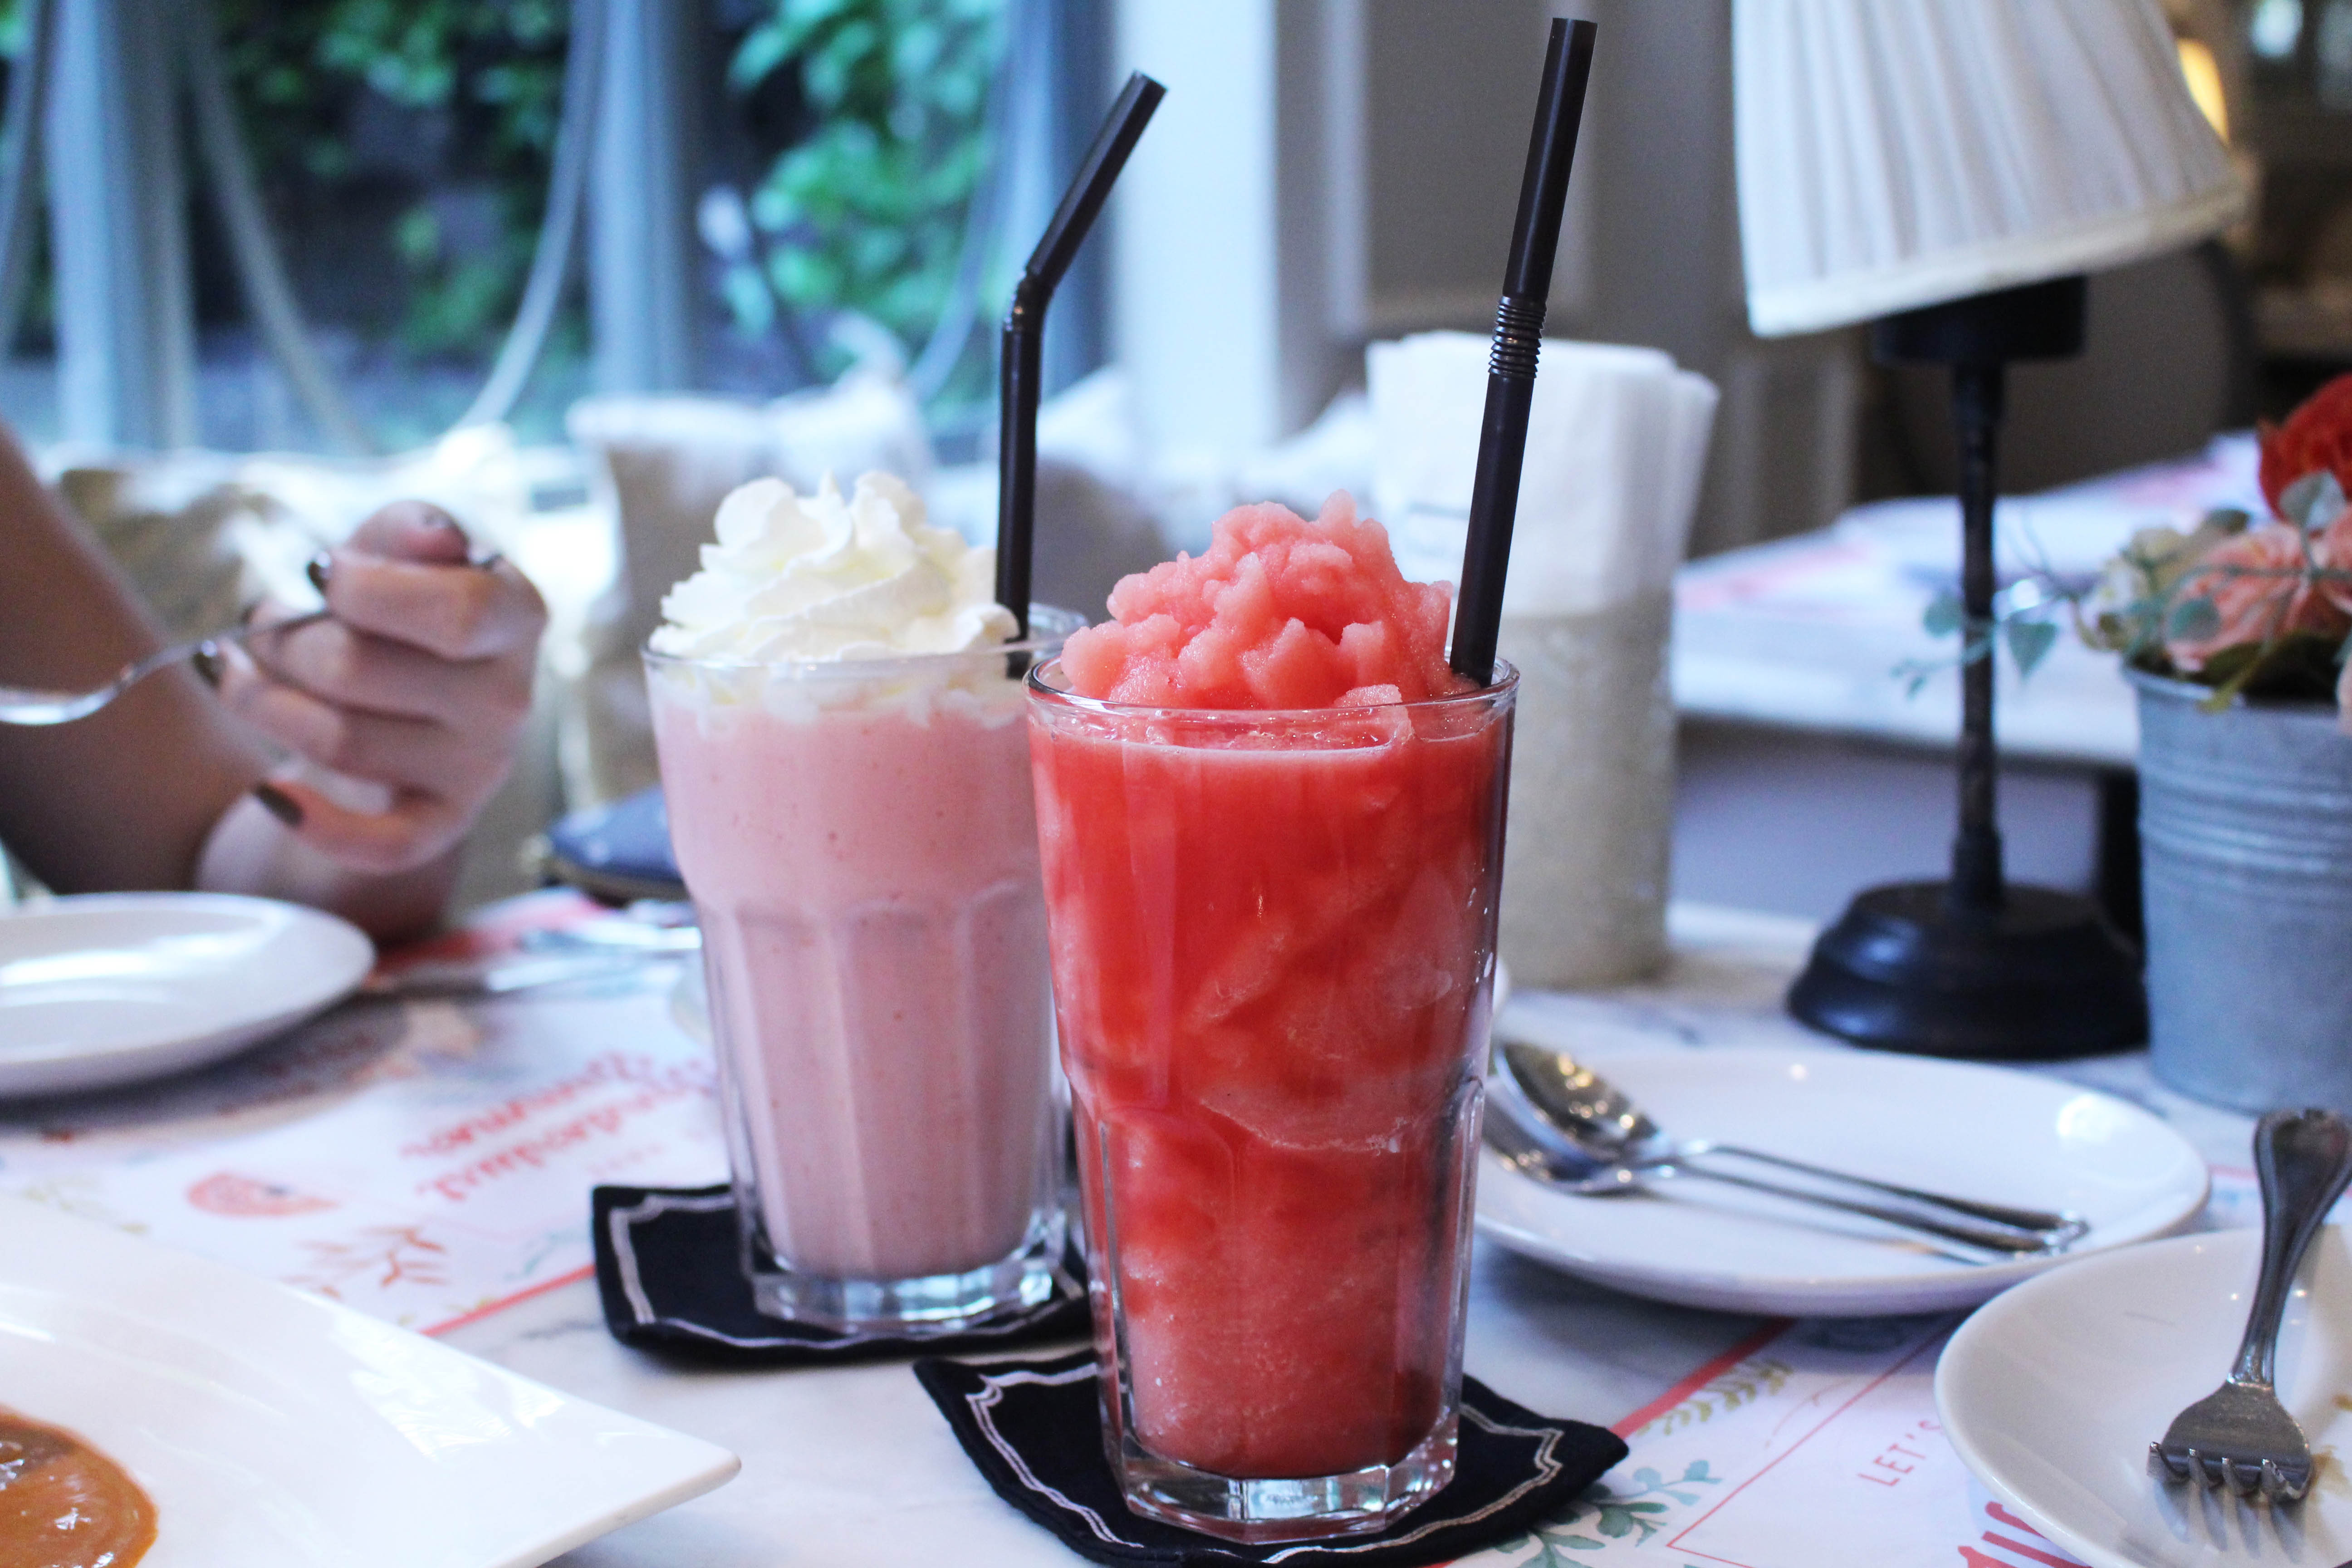 Rosy shake (approximately 5SGD) and watermelon ice blend (approximately 4SGD) that tasted as good as it looks, at Audrey Café and Bistro.